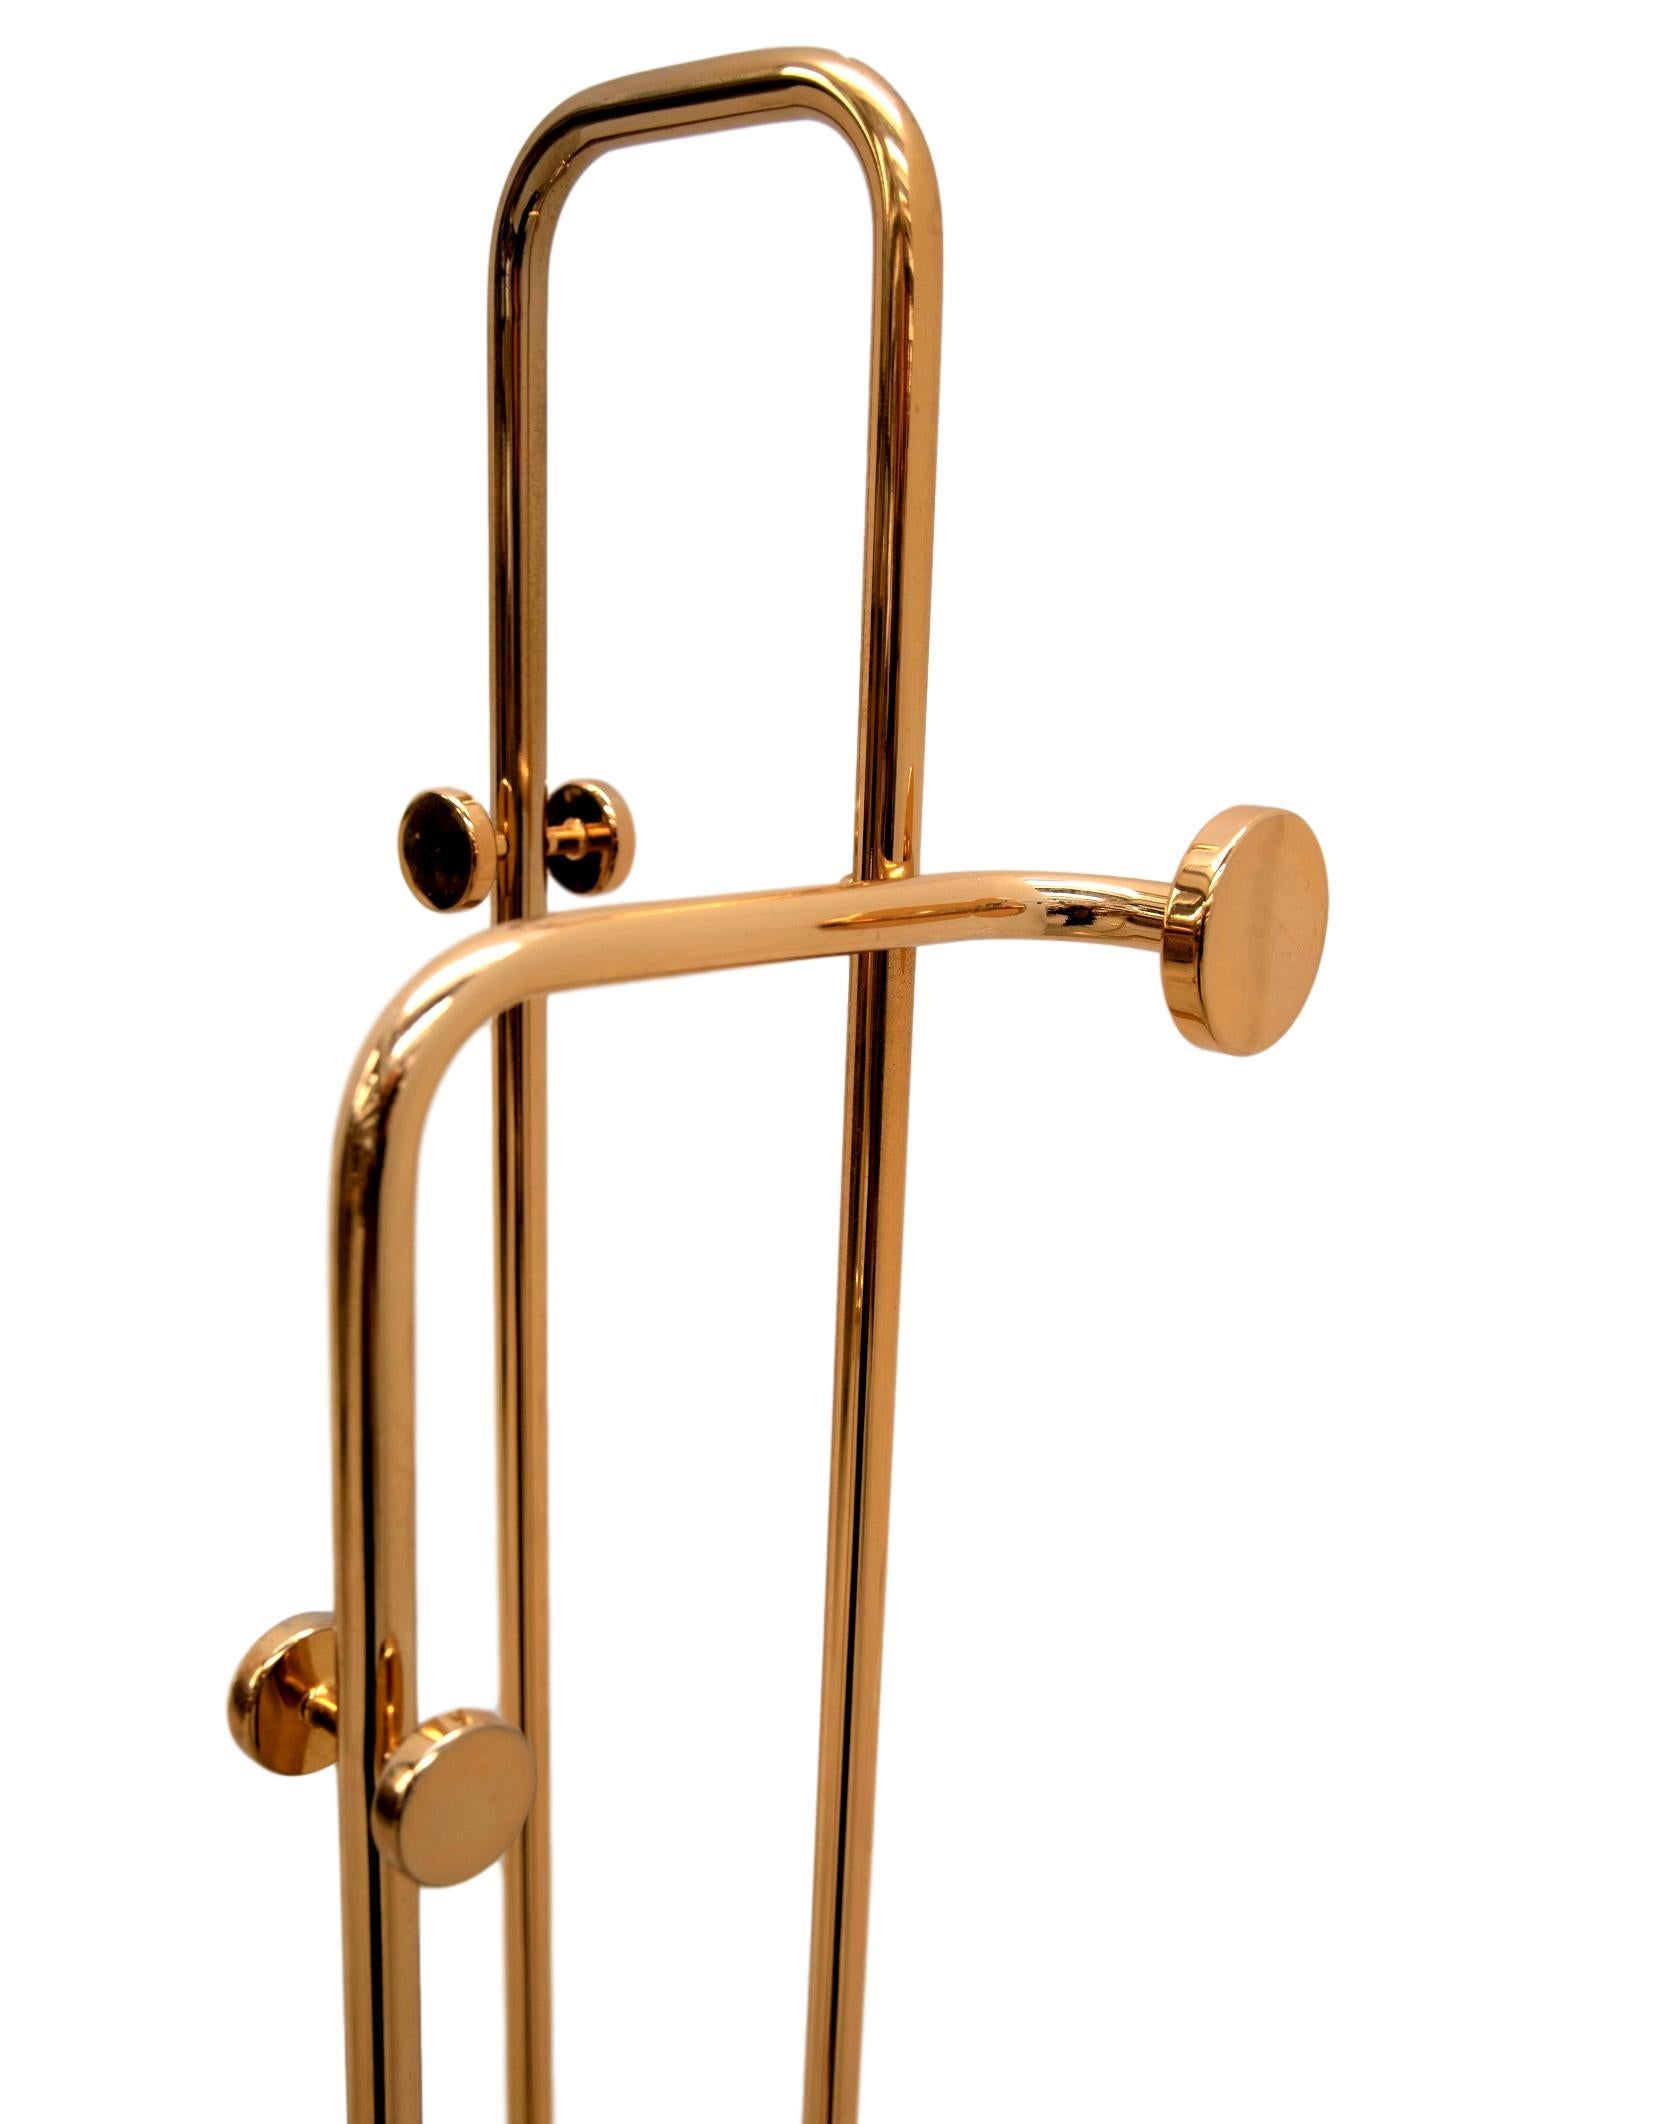 Vintage 1970s Italian brass dressboy valet stand. A great piece that perfectly adds to every home decor the typical glitz, glamour and gold of Hollywood Regency style with its metallic golden accents and luscious lines and curves as expressed by